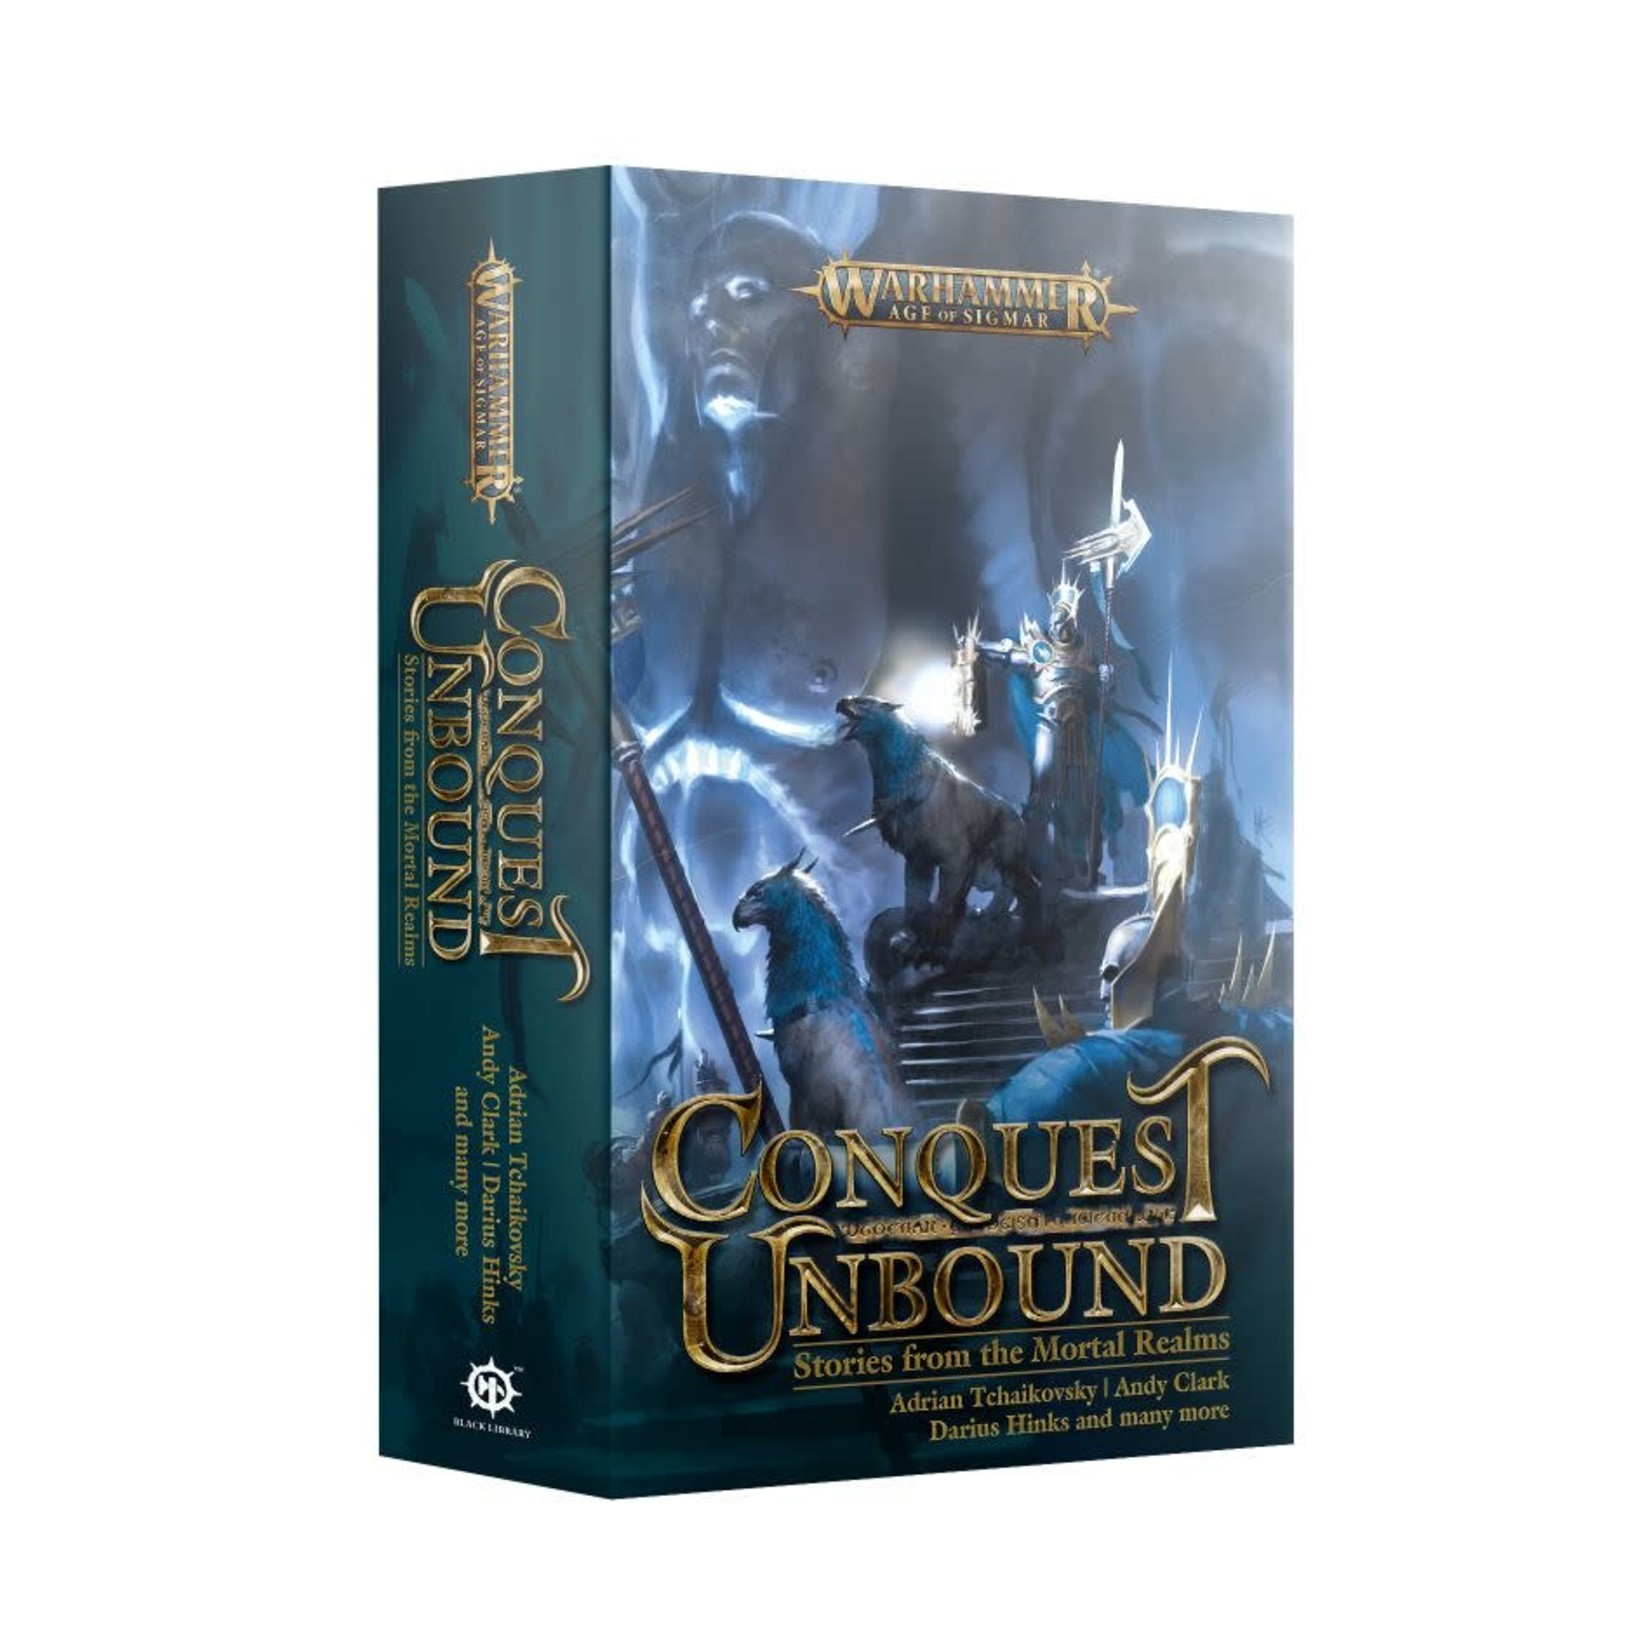 Conquest Unbound Stories from the Mortal Realms PaperBack